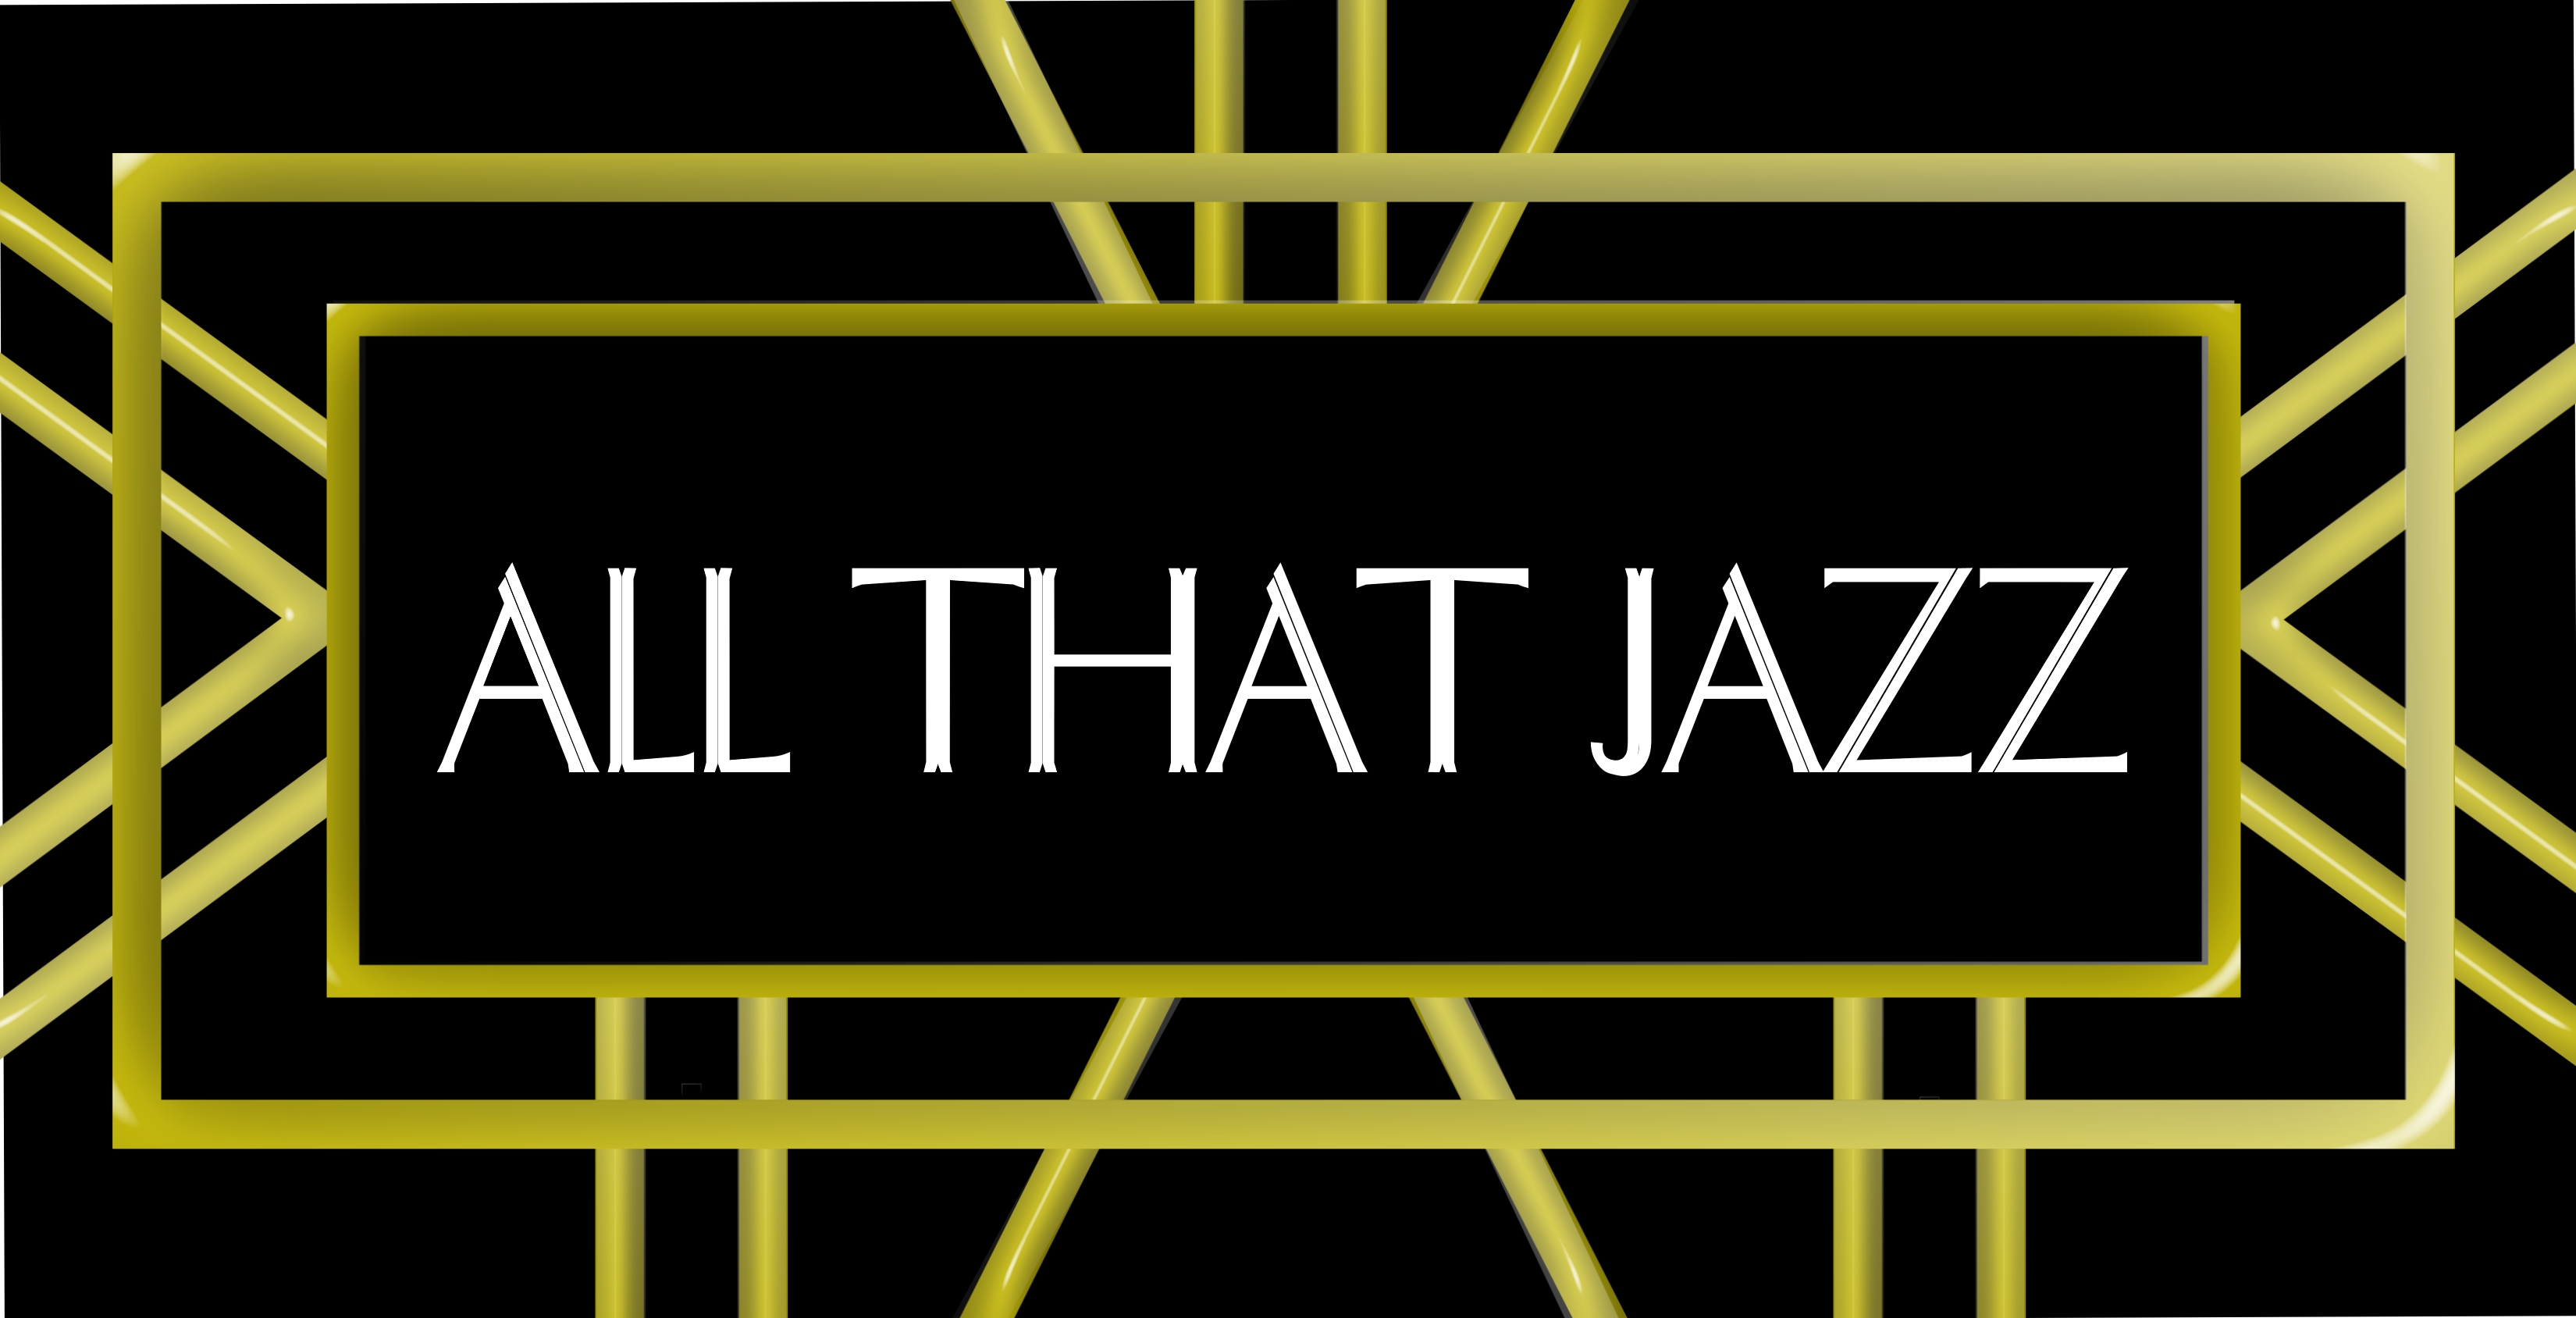 All That Jazz - The Music House Museum.